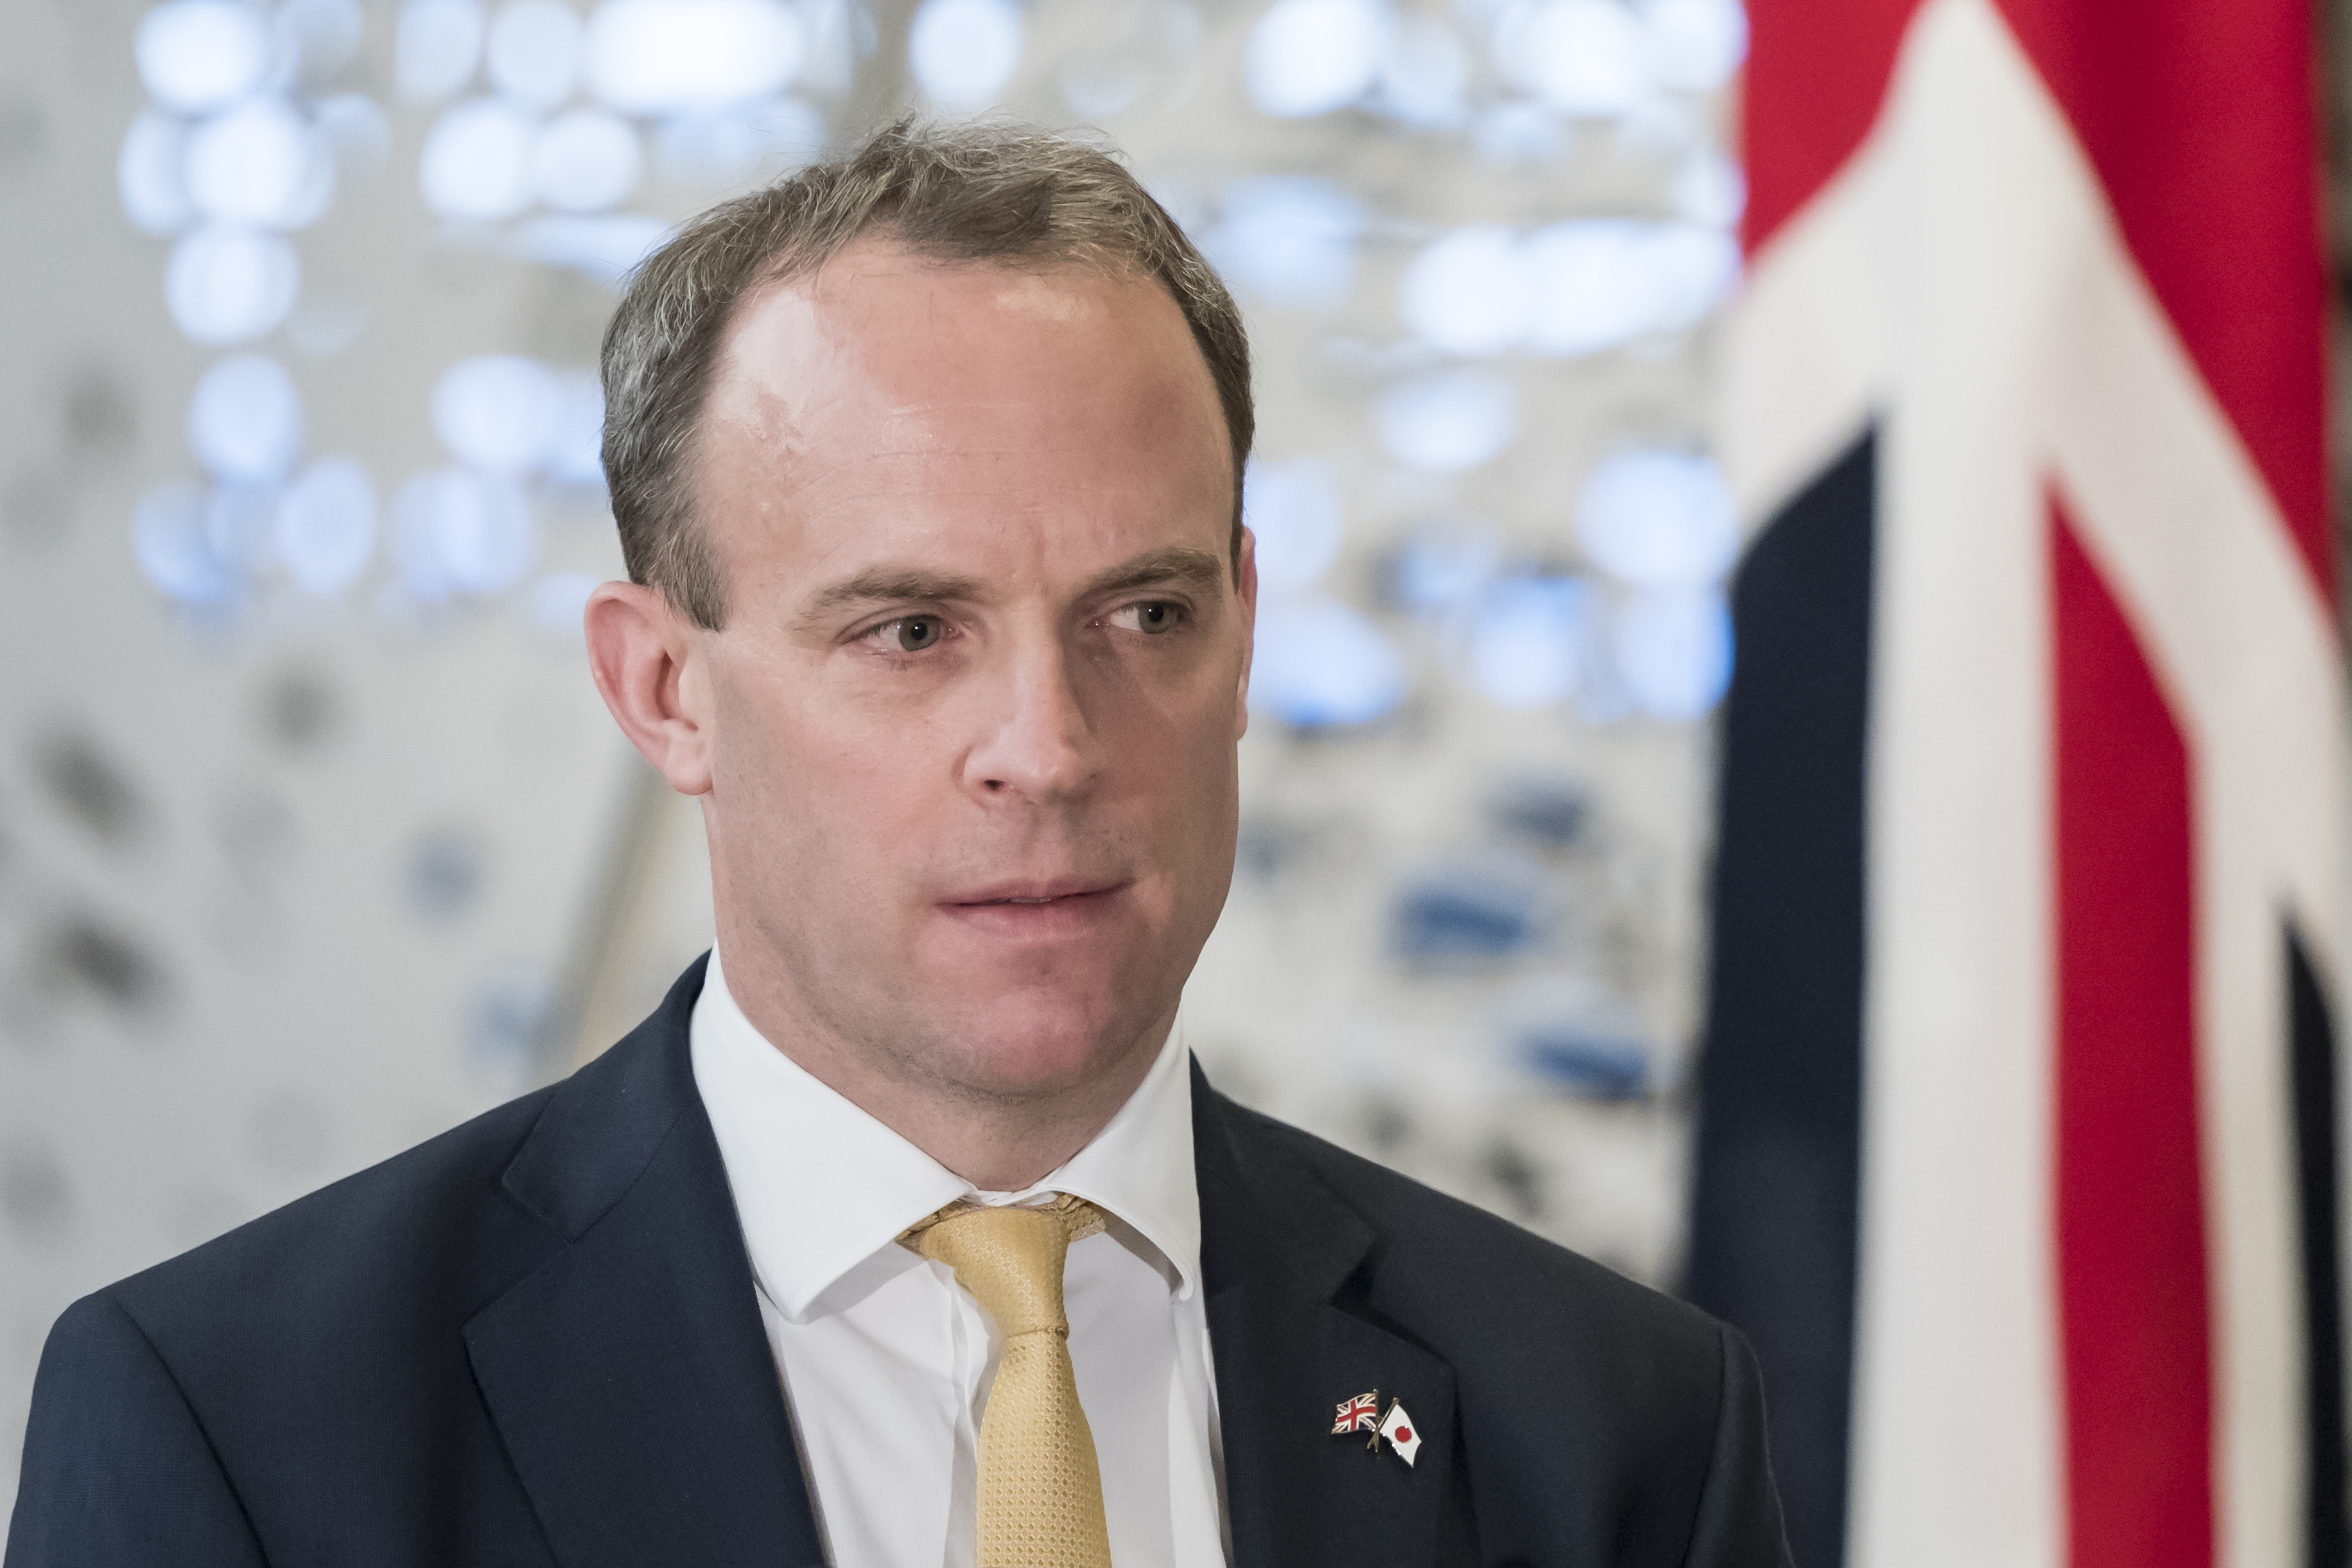 UK Foreign Secretary Dominic Raab during a joint news conference in Tokyo, Japan, on February 8.